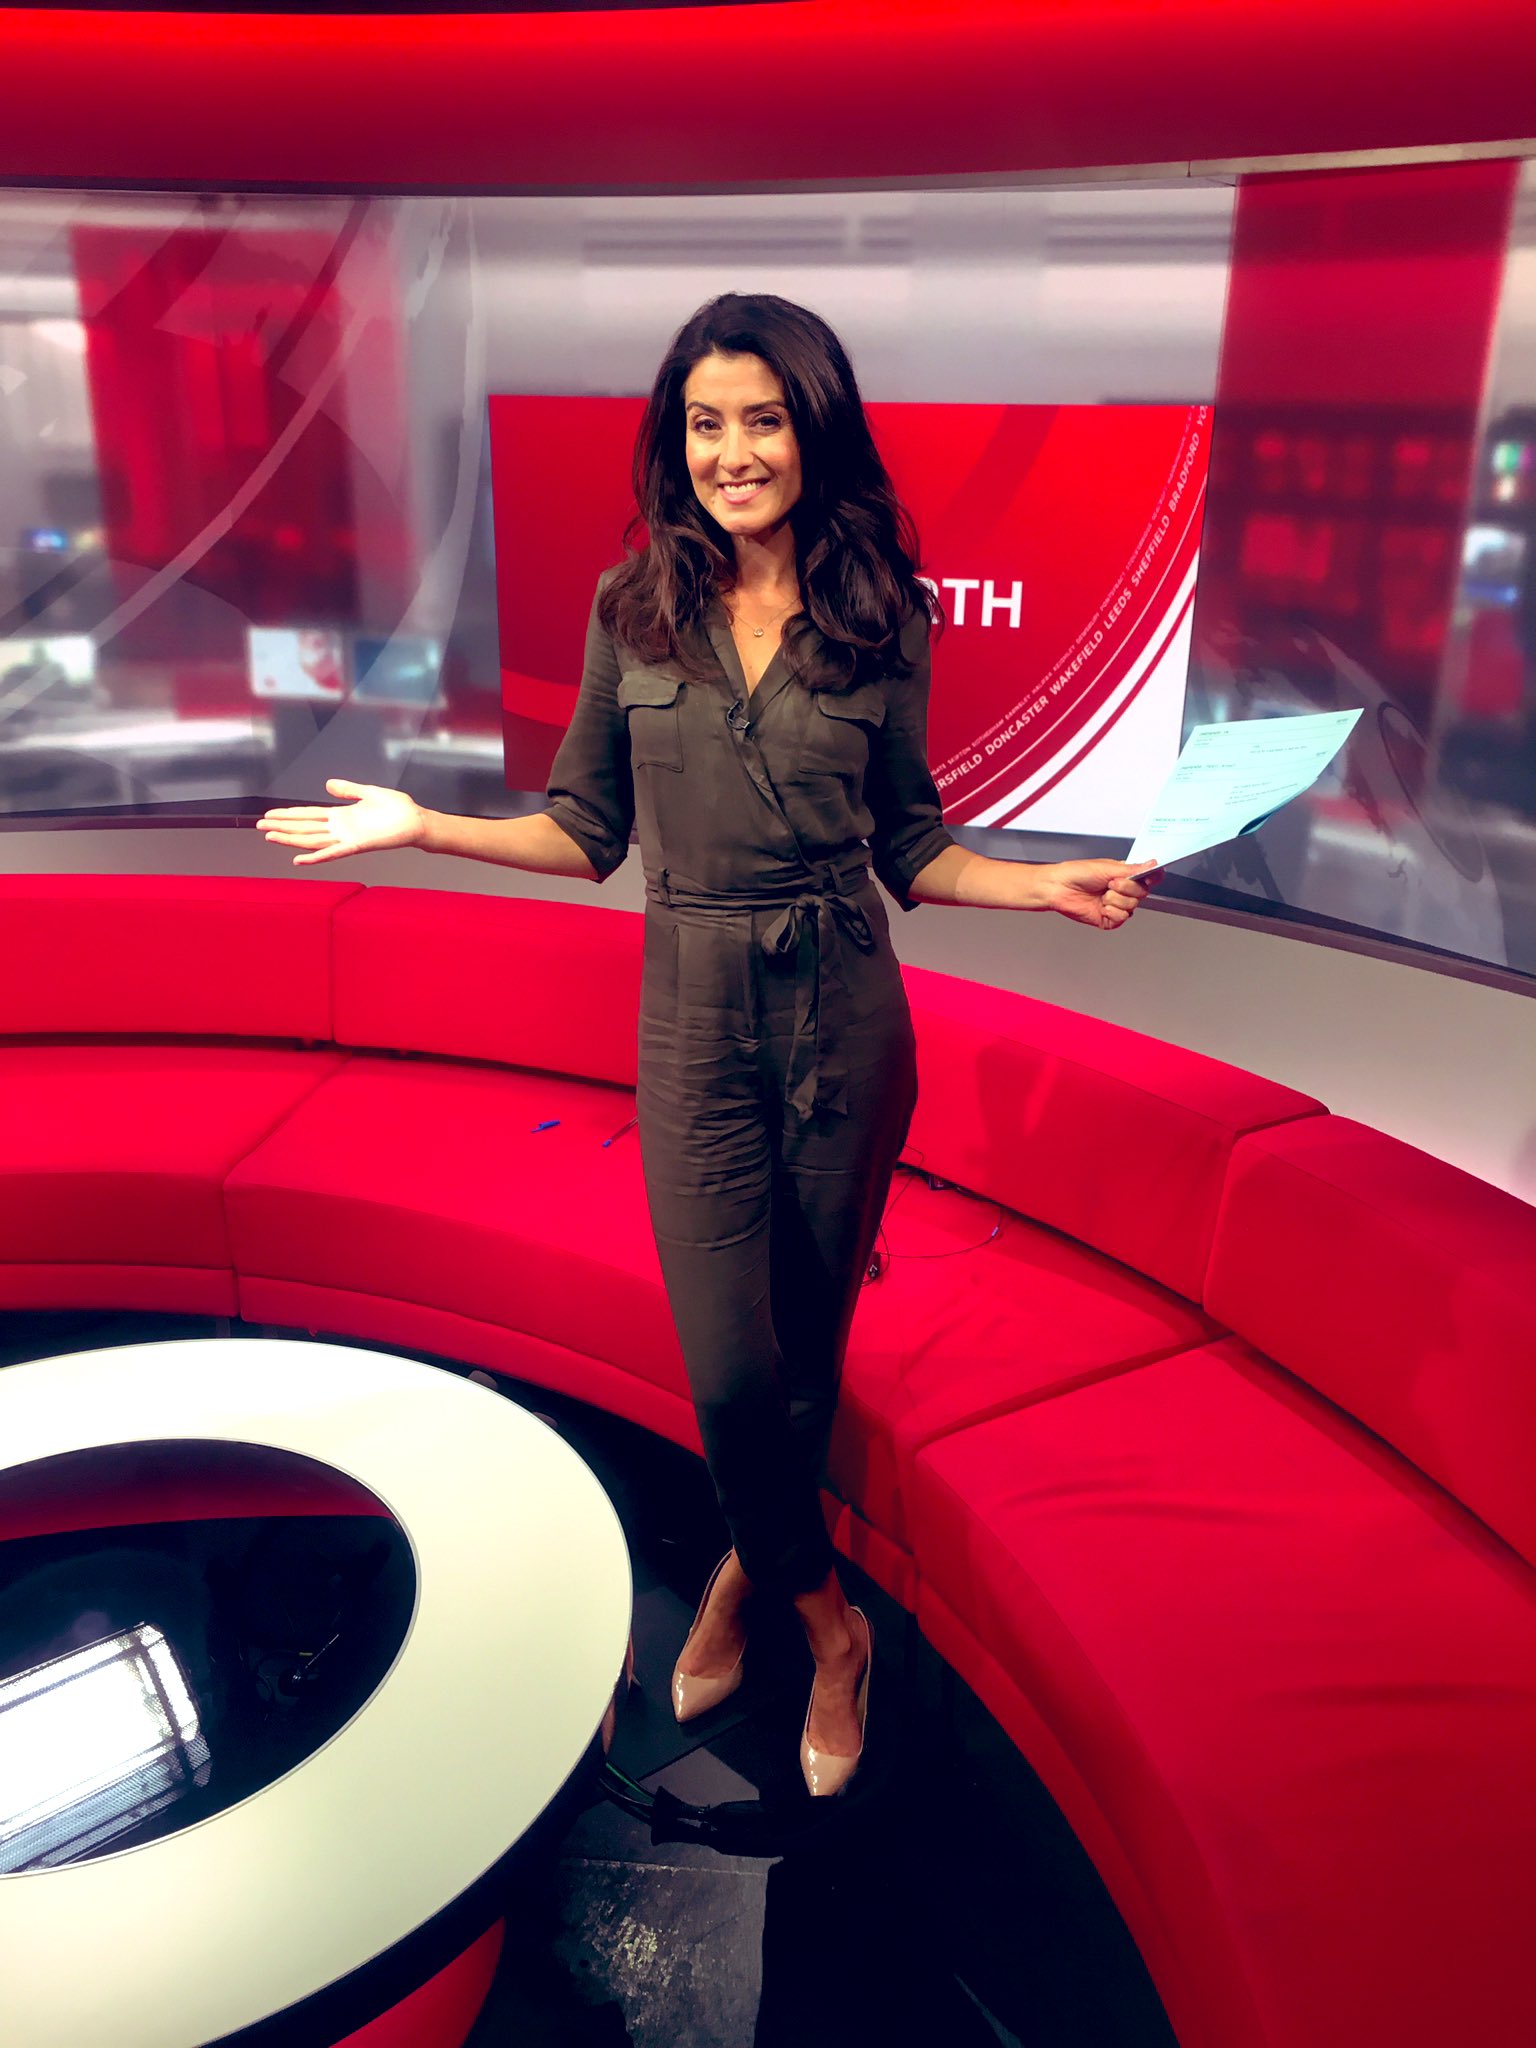 Amy Garcia Is A Jumpsuit Acceptable News Reading Attire clooknorth